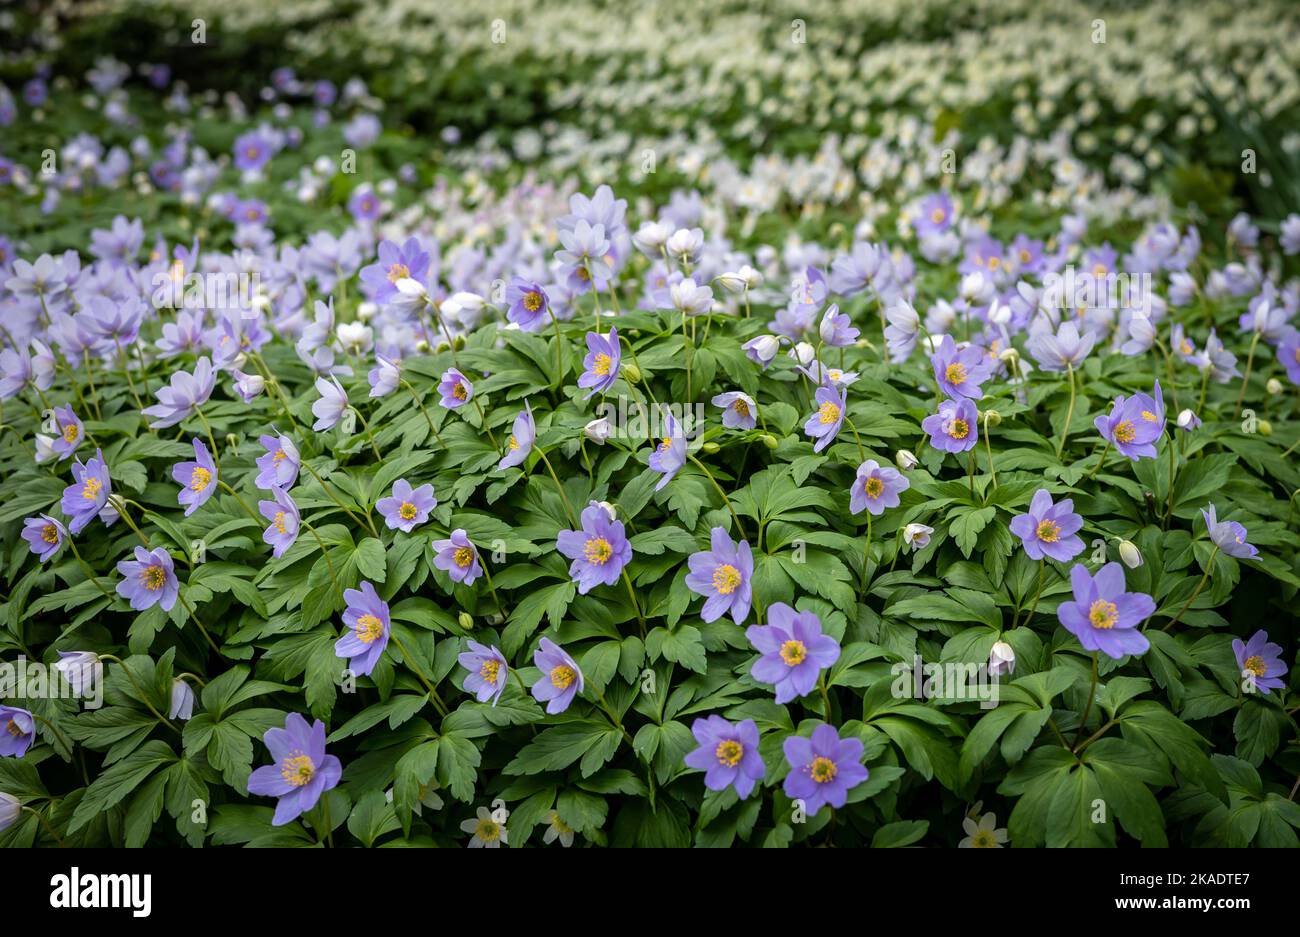 A beautiful natural carpet of white and violet wood anemone flowers blooming in the springtime. Stock Photo